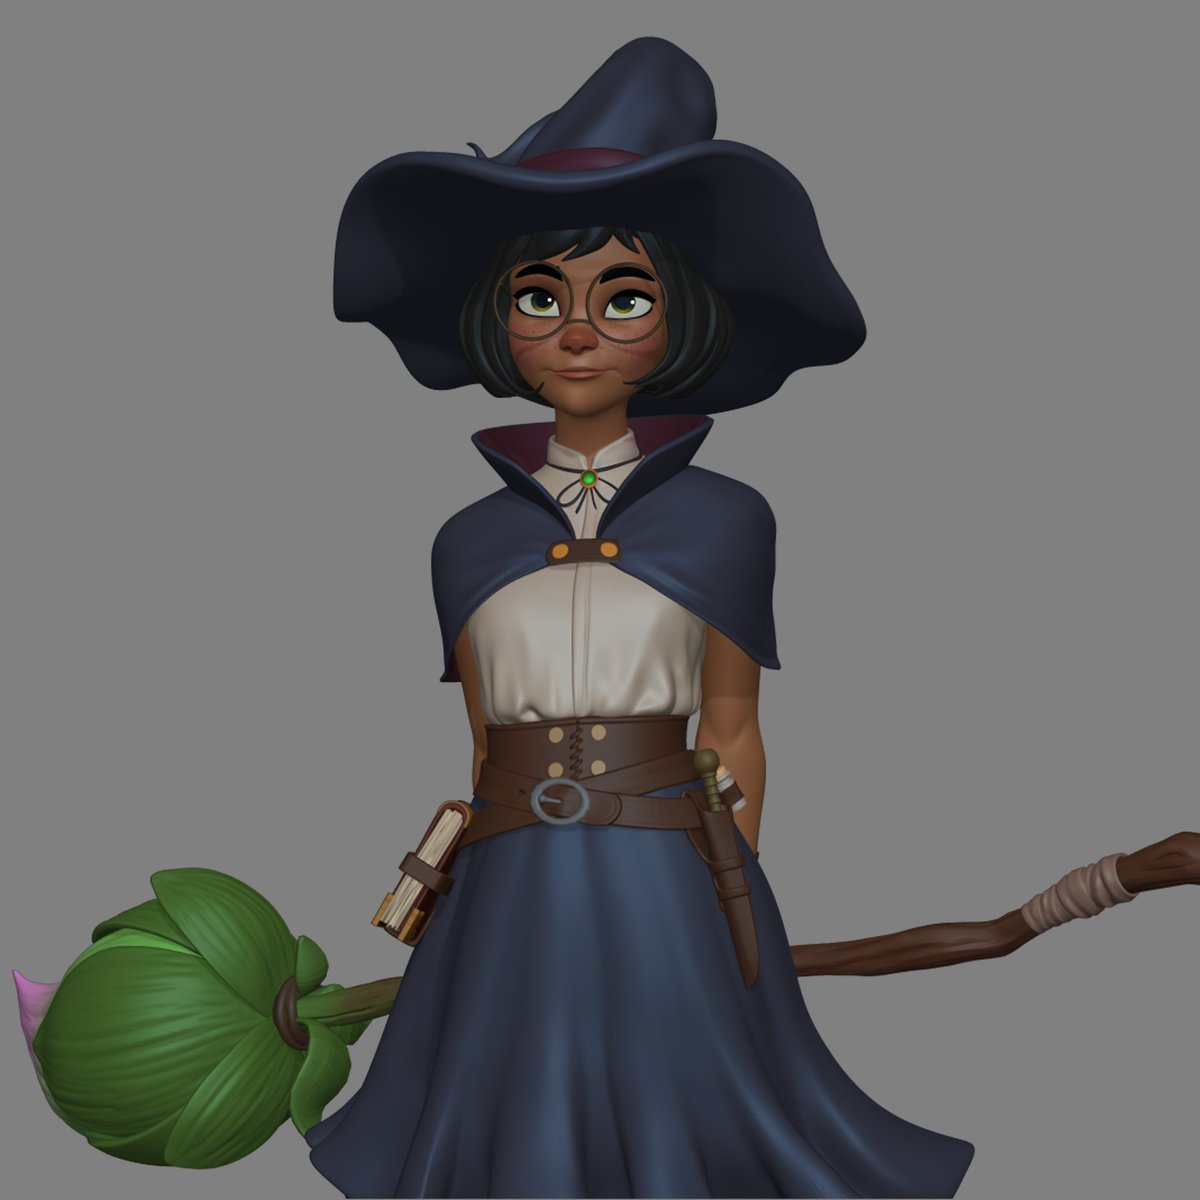 Hey! I wanted to share with you a few progress on this character. Basically, she was a knight but now she is an apprentice wood witch. Hope you like it. #3dcharacterdesign #zbrush #witch #3dcharacter